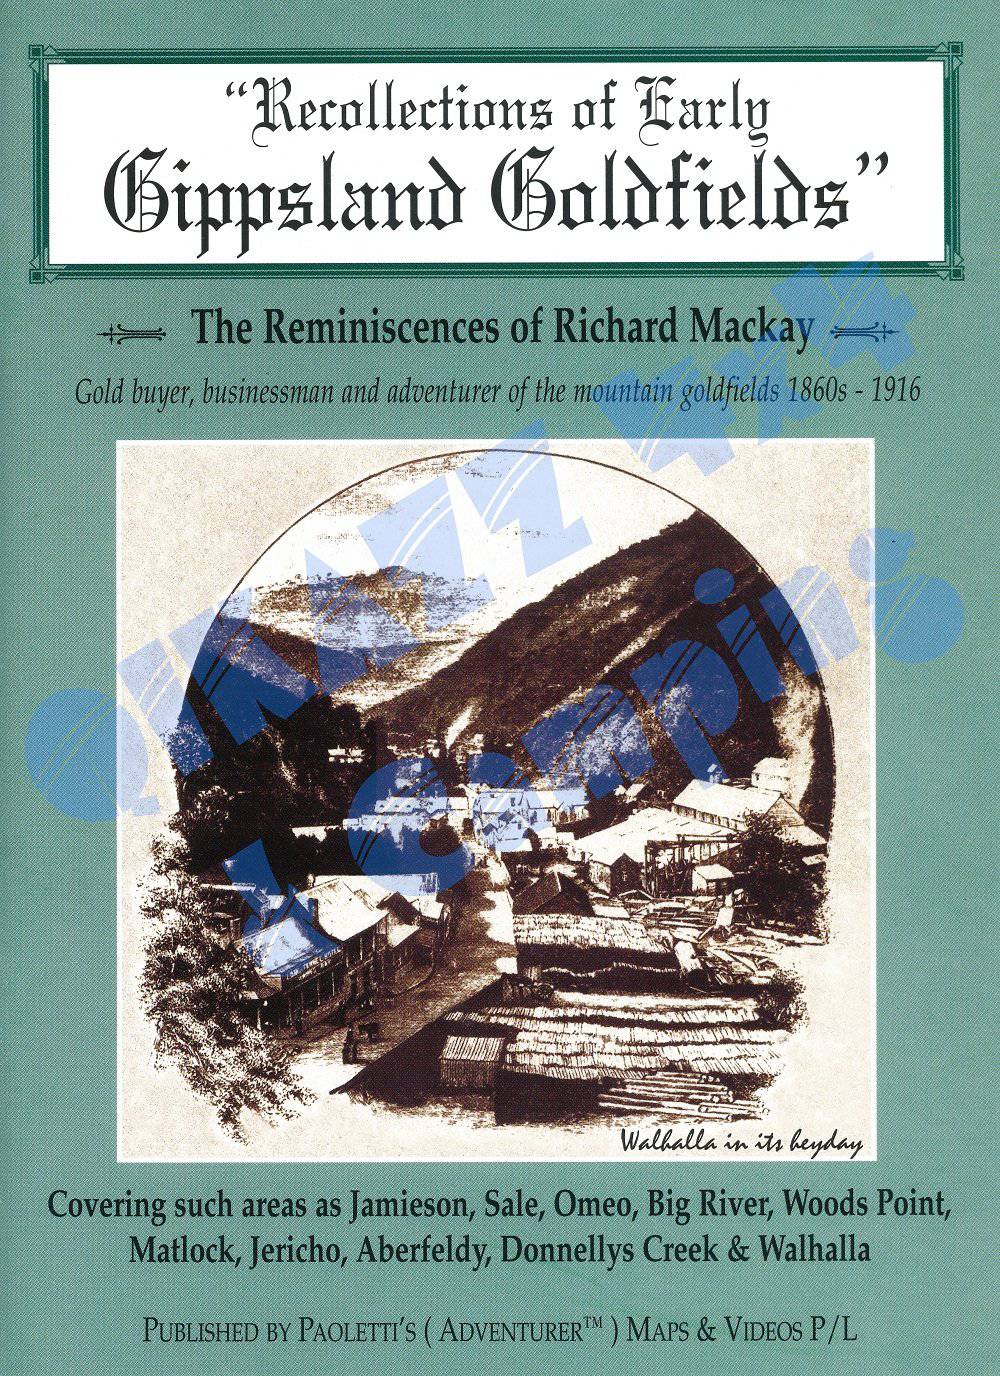 Recollections of Early Gippsland Goldfield by Richard Mackay | Adventurer Maps